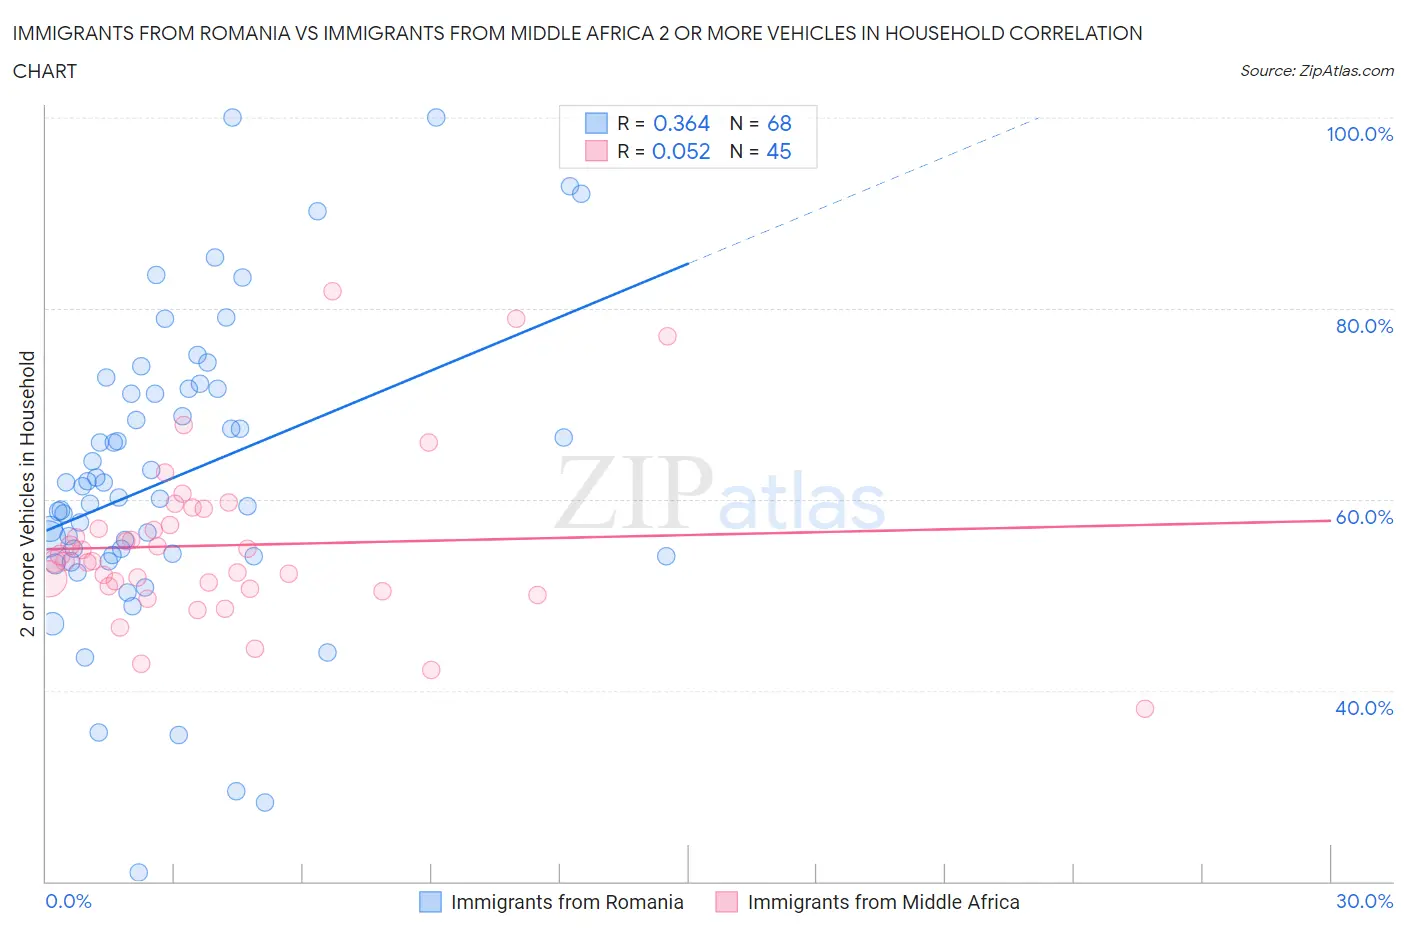 Immigrants from Romania vs Immigrants from Middle Africa 2 or more Vehicles in Household